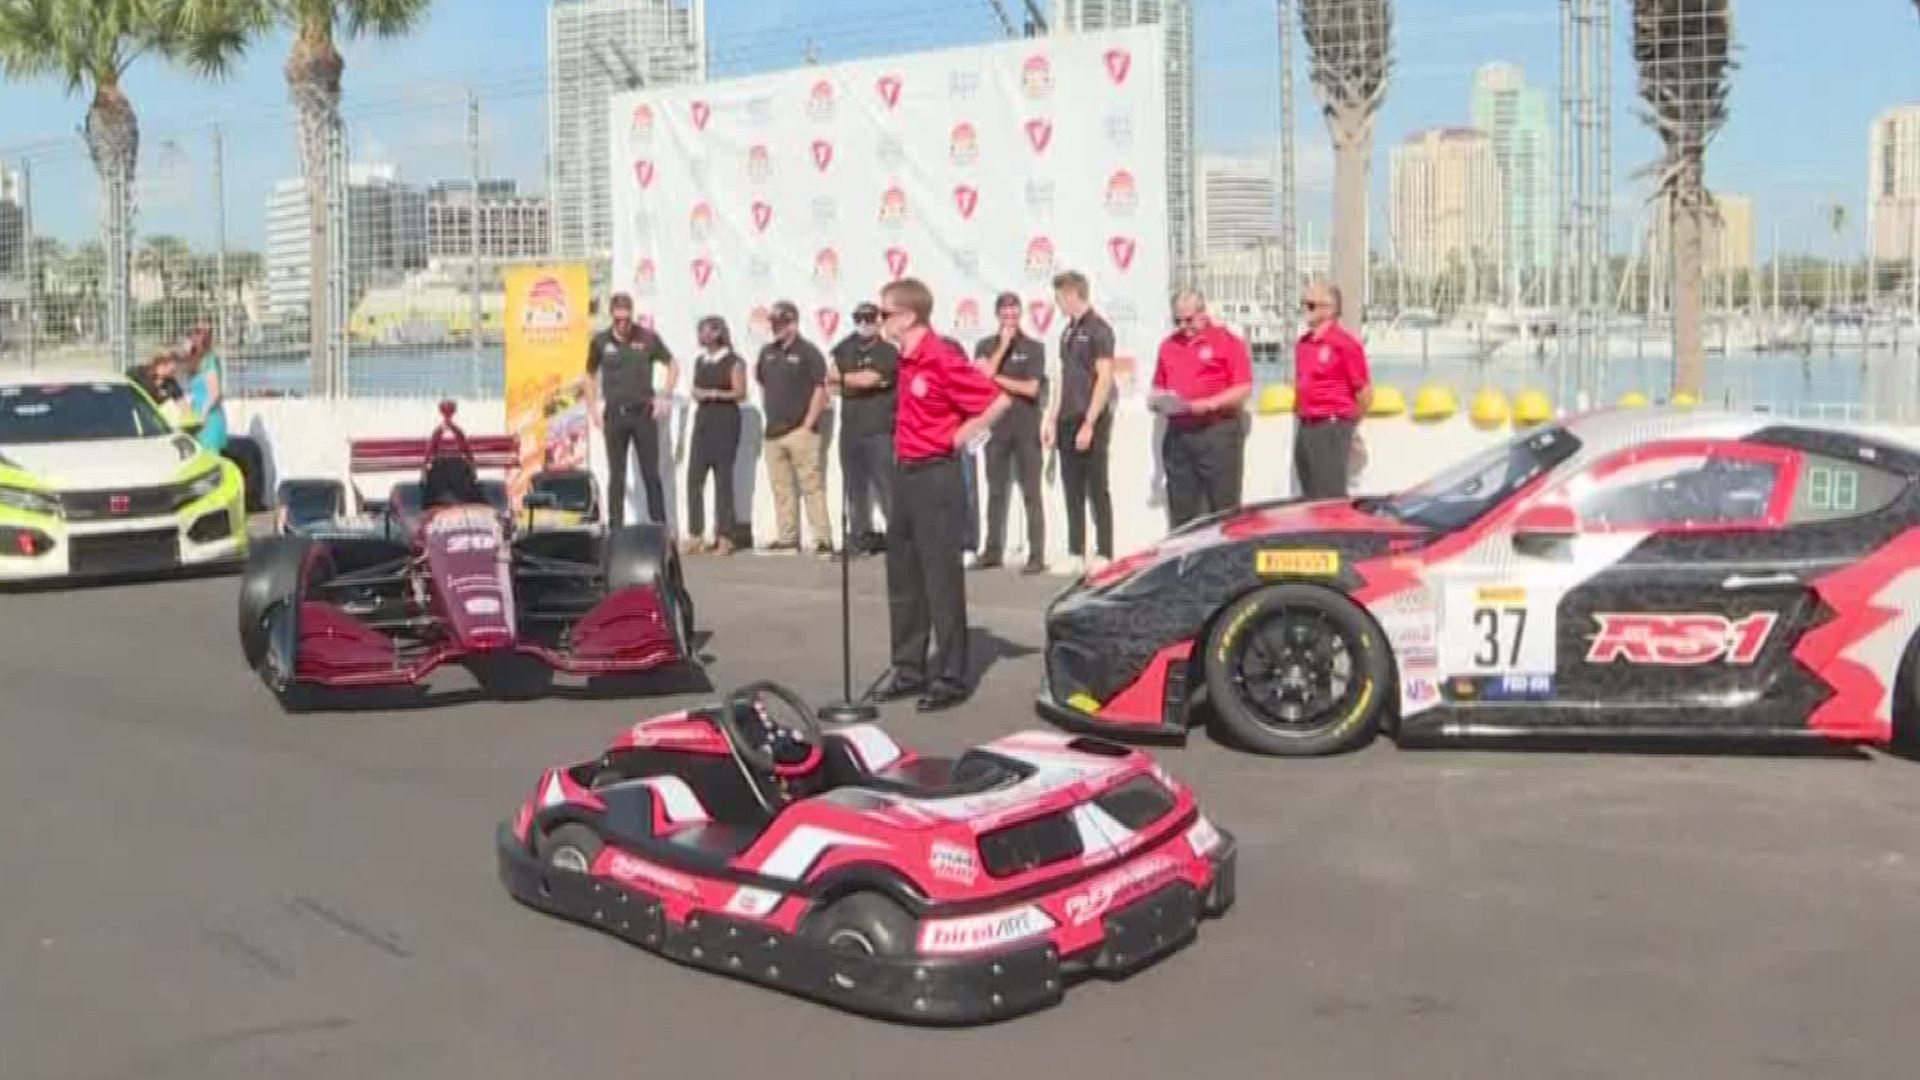 The Firestone Grand Prix returns in March to downtown St. Petersburg.